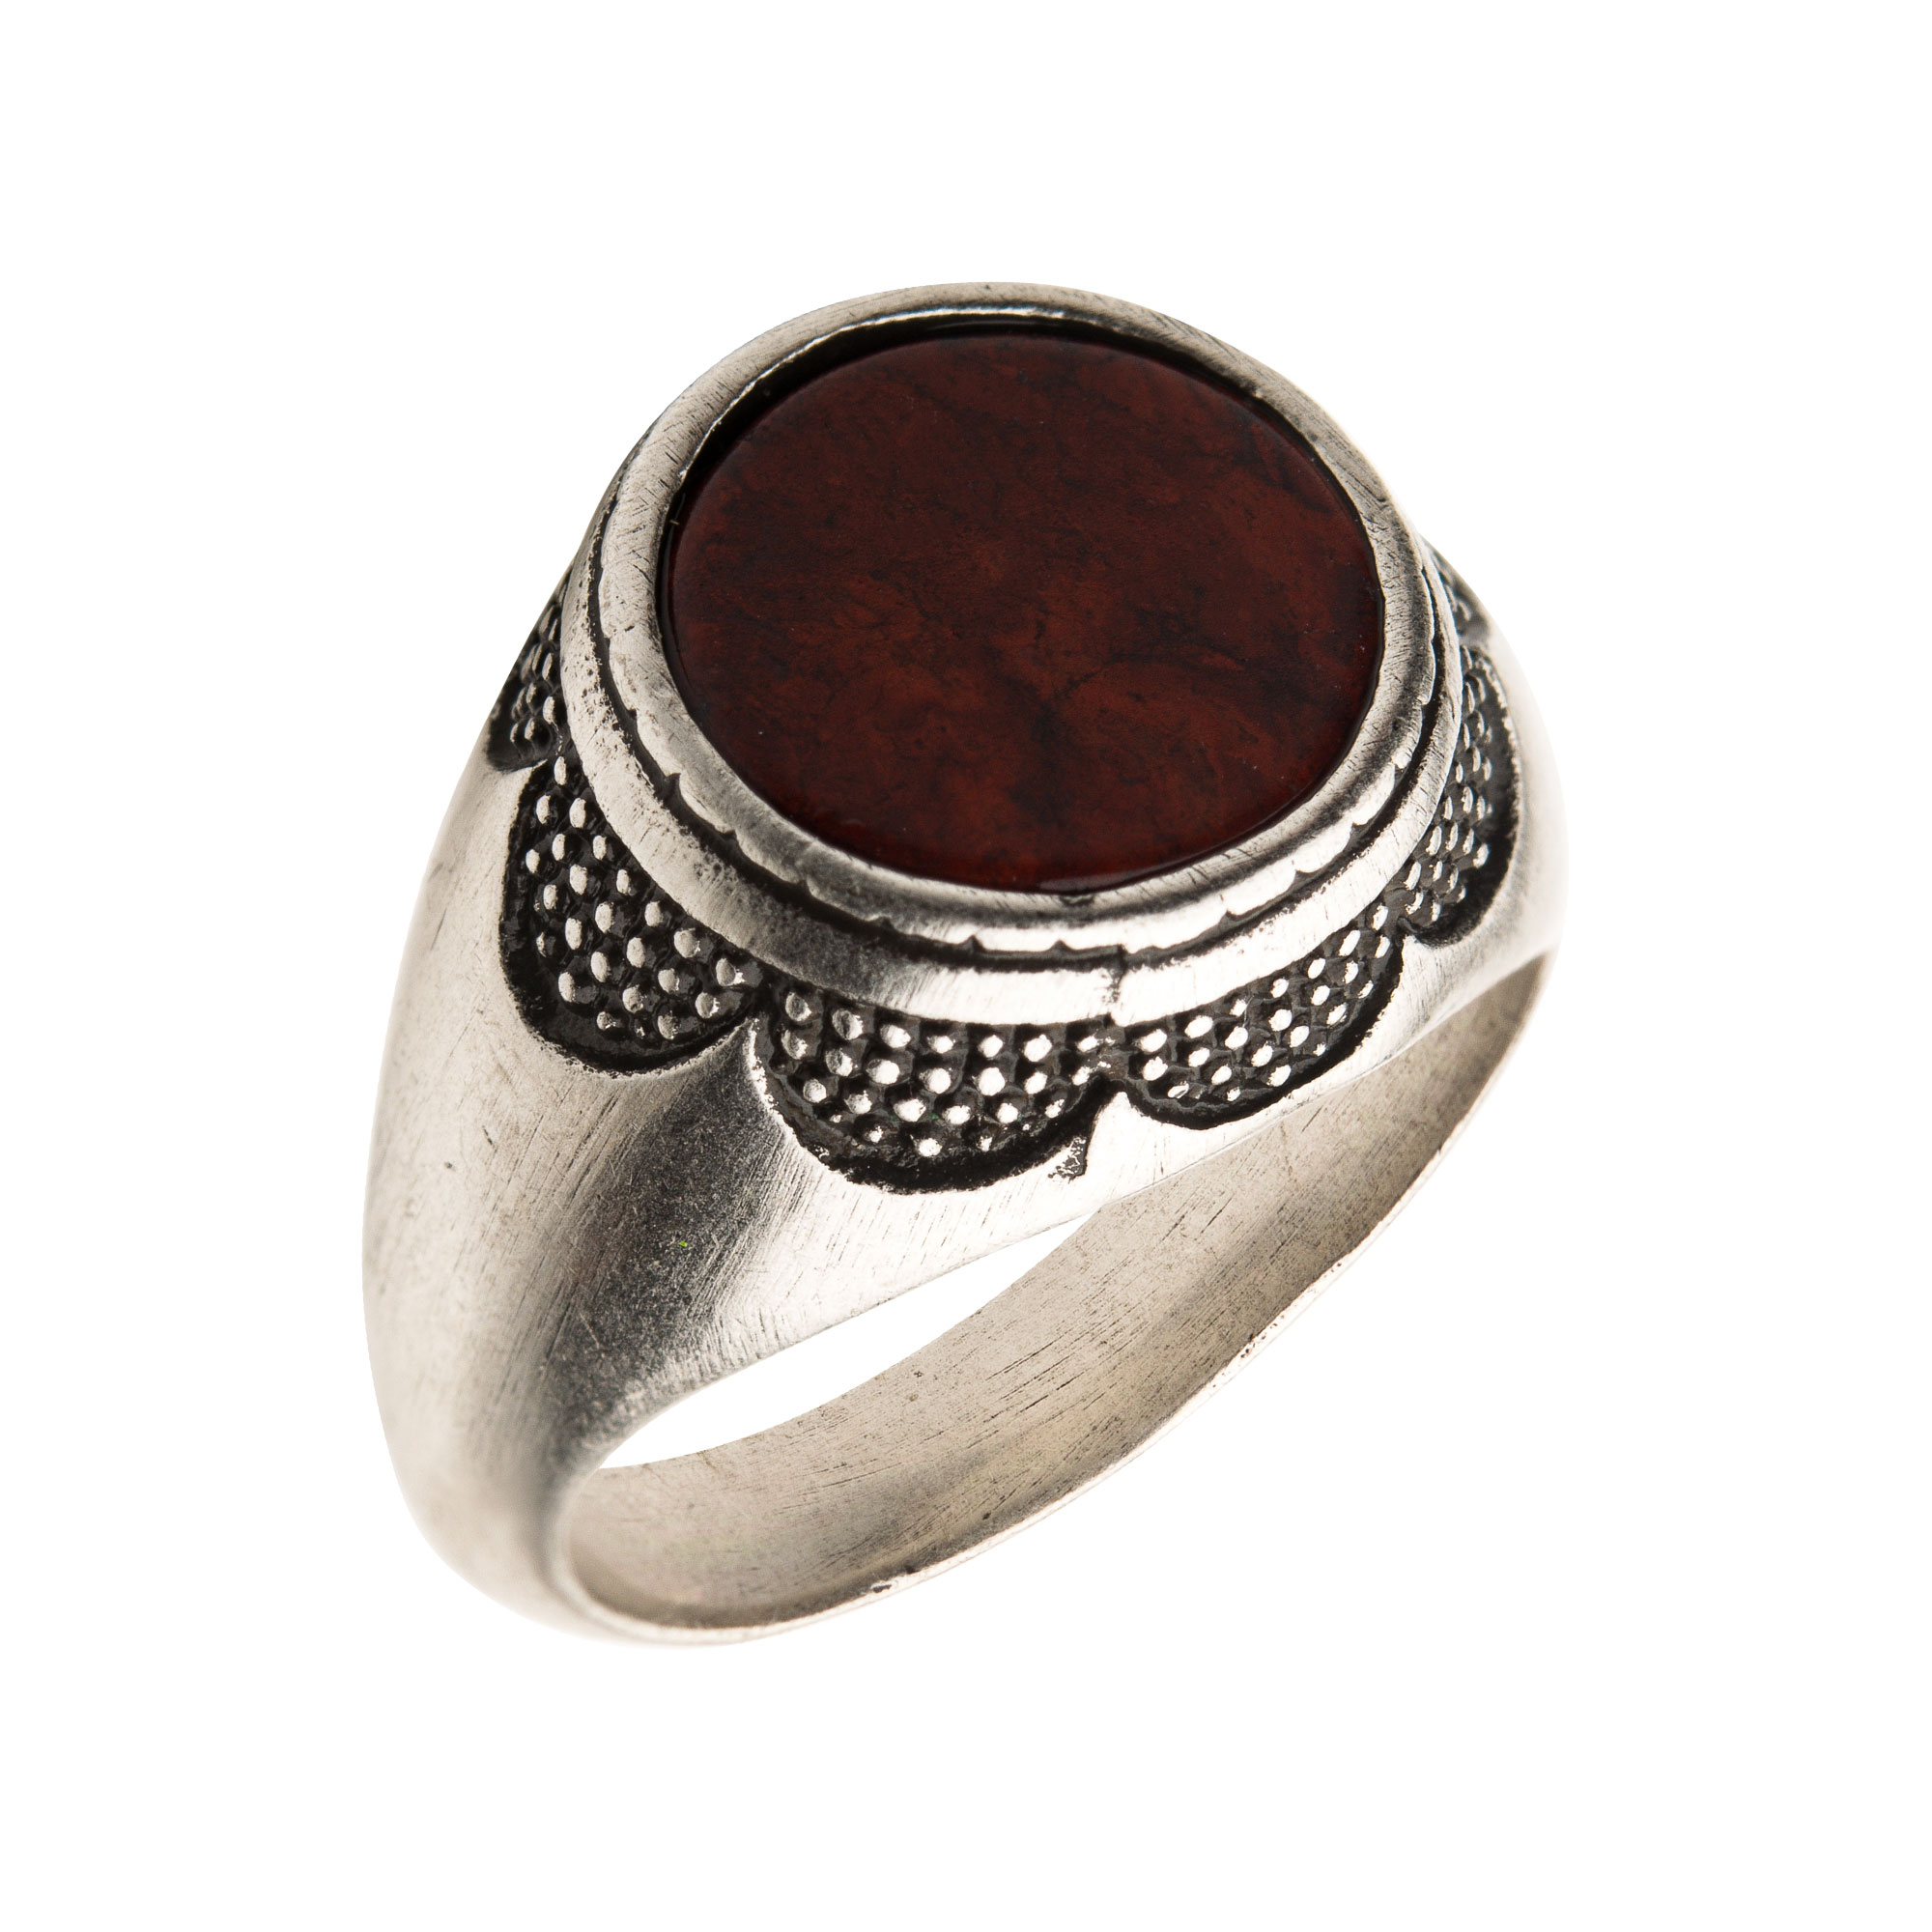 Stainless Steel Silver Plated with Red Jasper Stone Ring Thurber's Fine Jewelry Wadsworth, OH